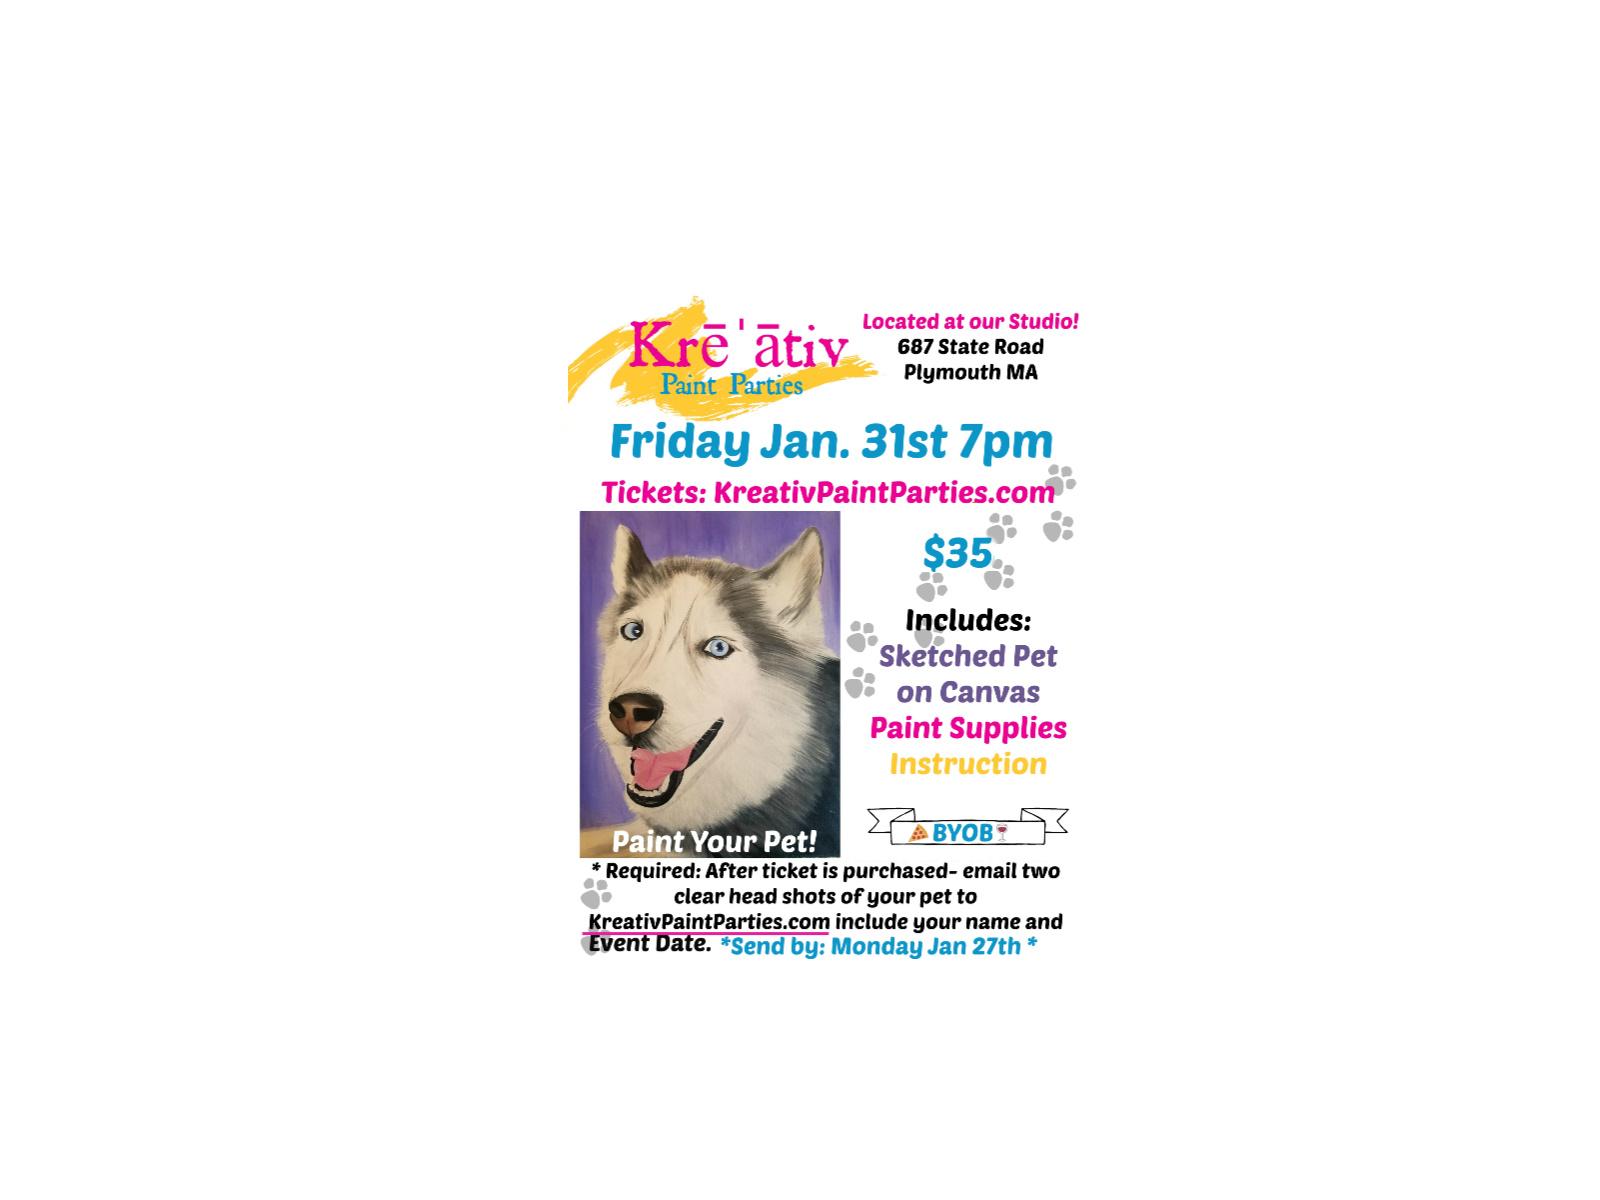 Paint you pet event - Kreativ Studio- Friday January 31st at 7pm 